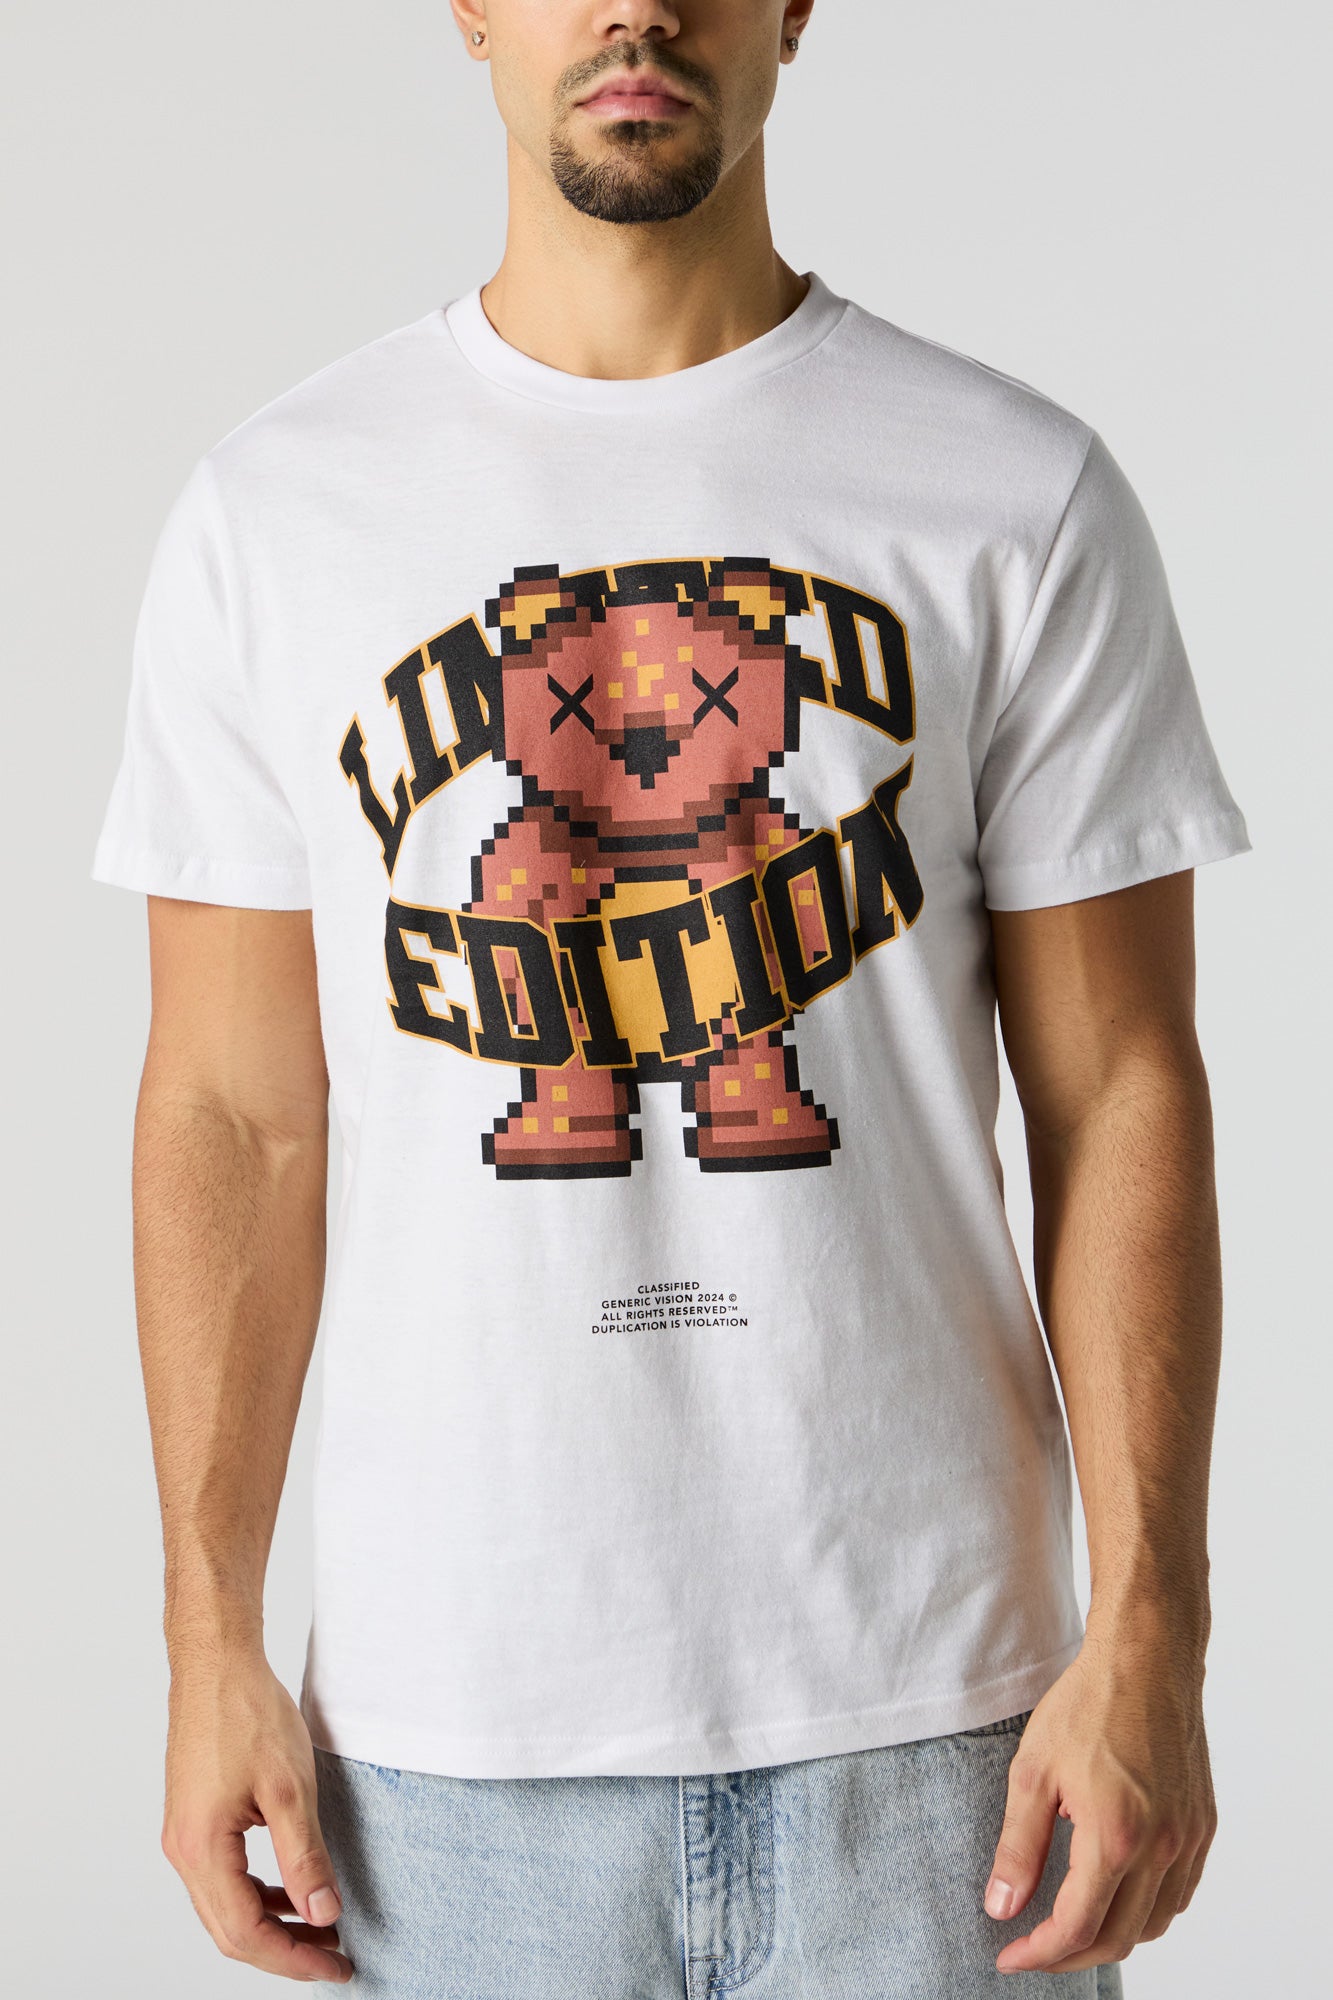 Limited Edition Graphic T-Shirt